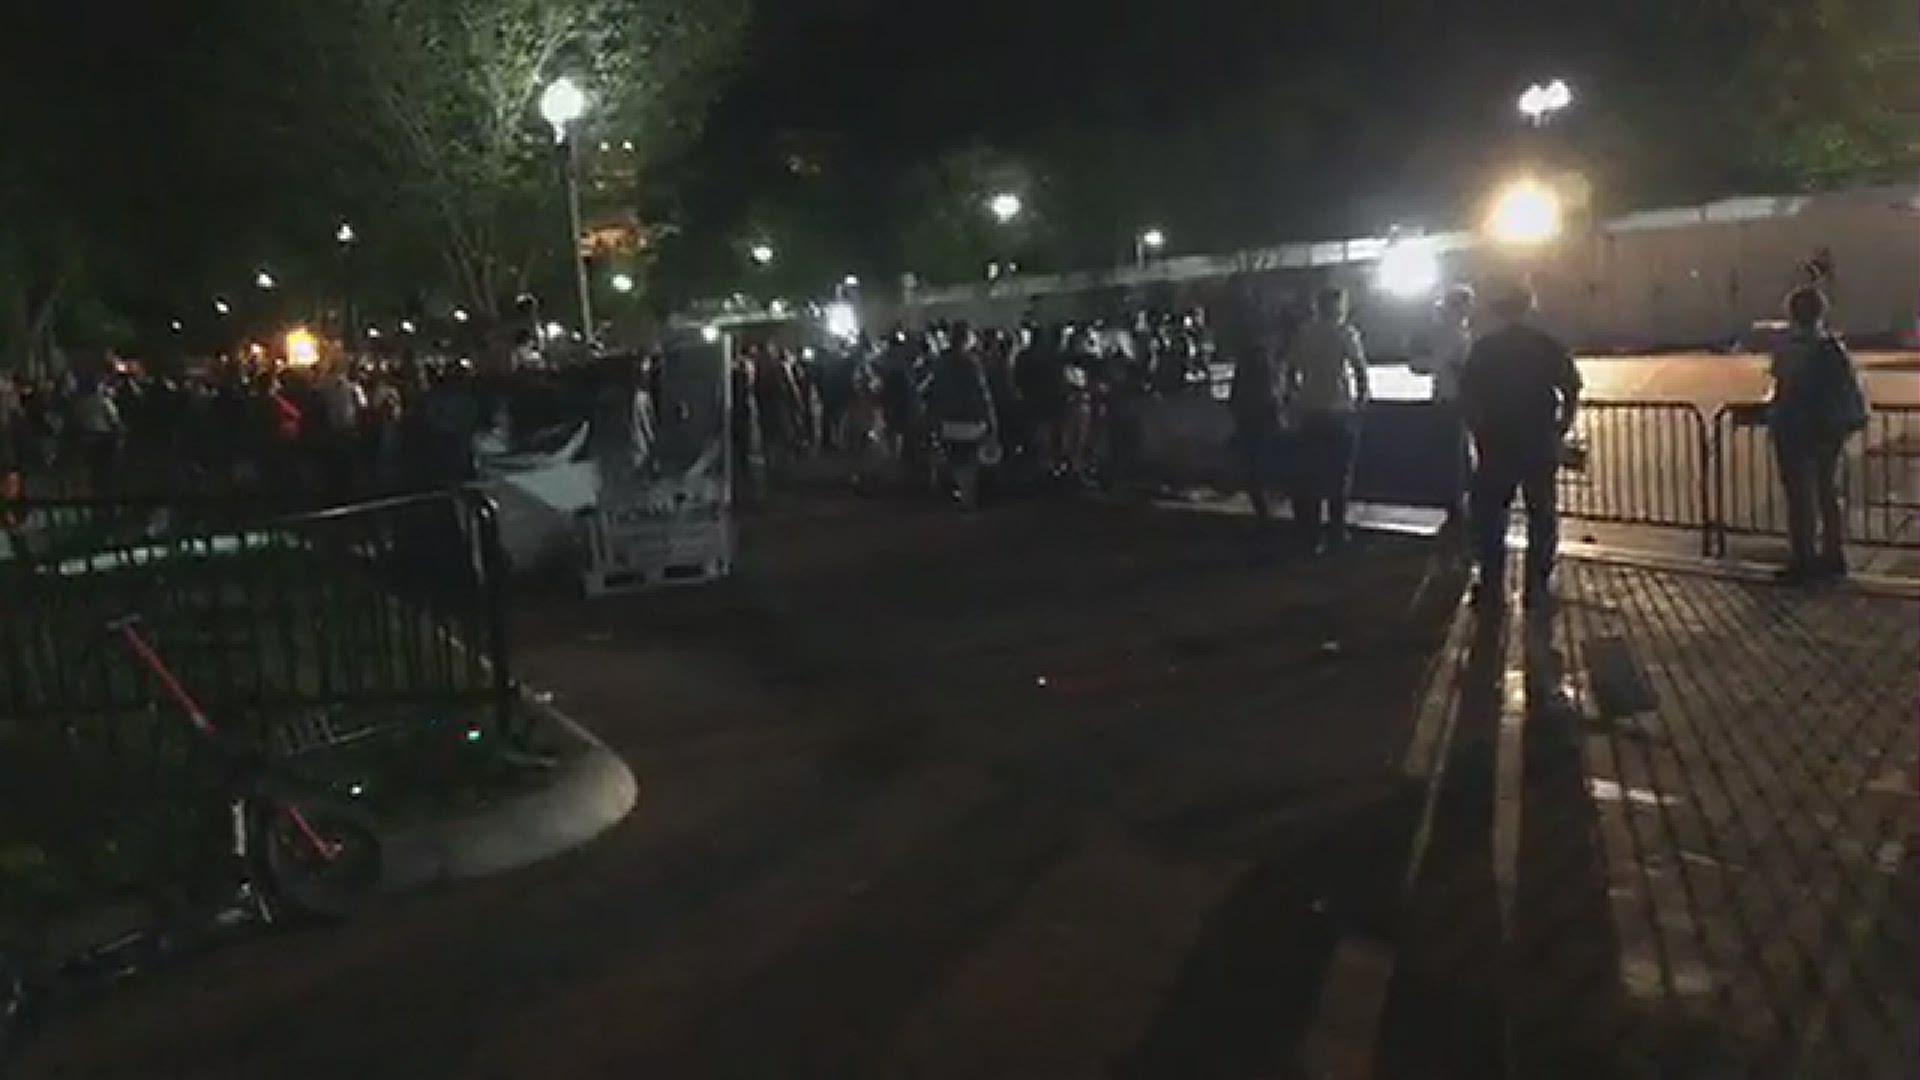 The protests continued into the night after marching through District streets hours prior.